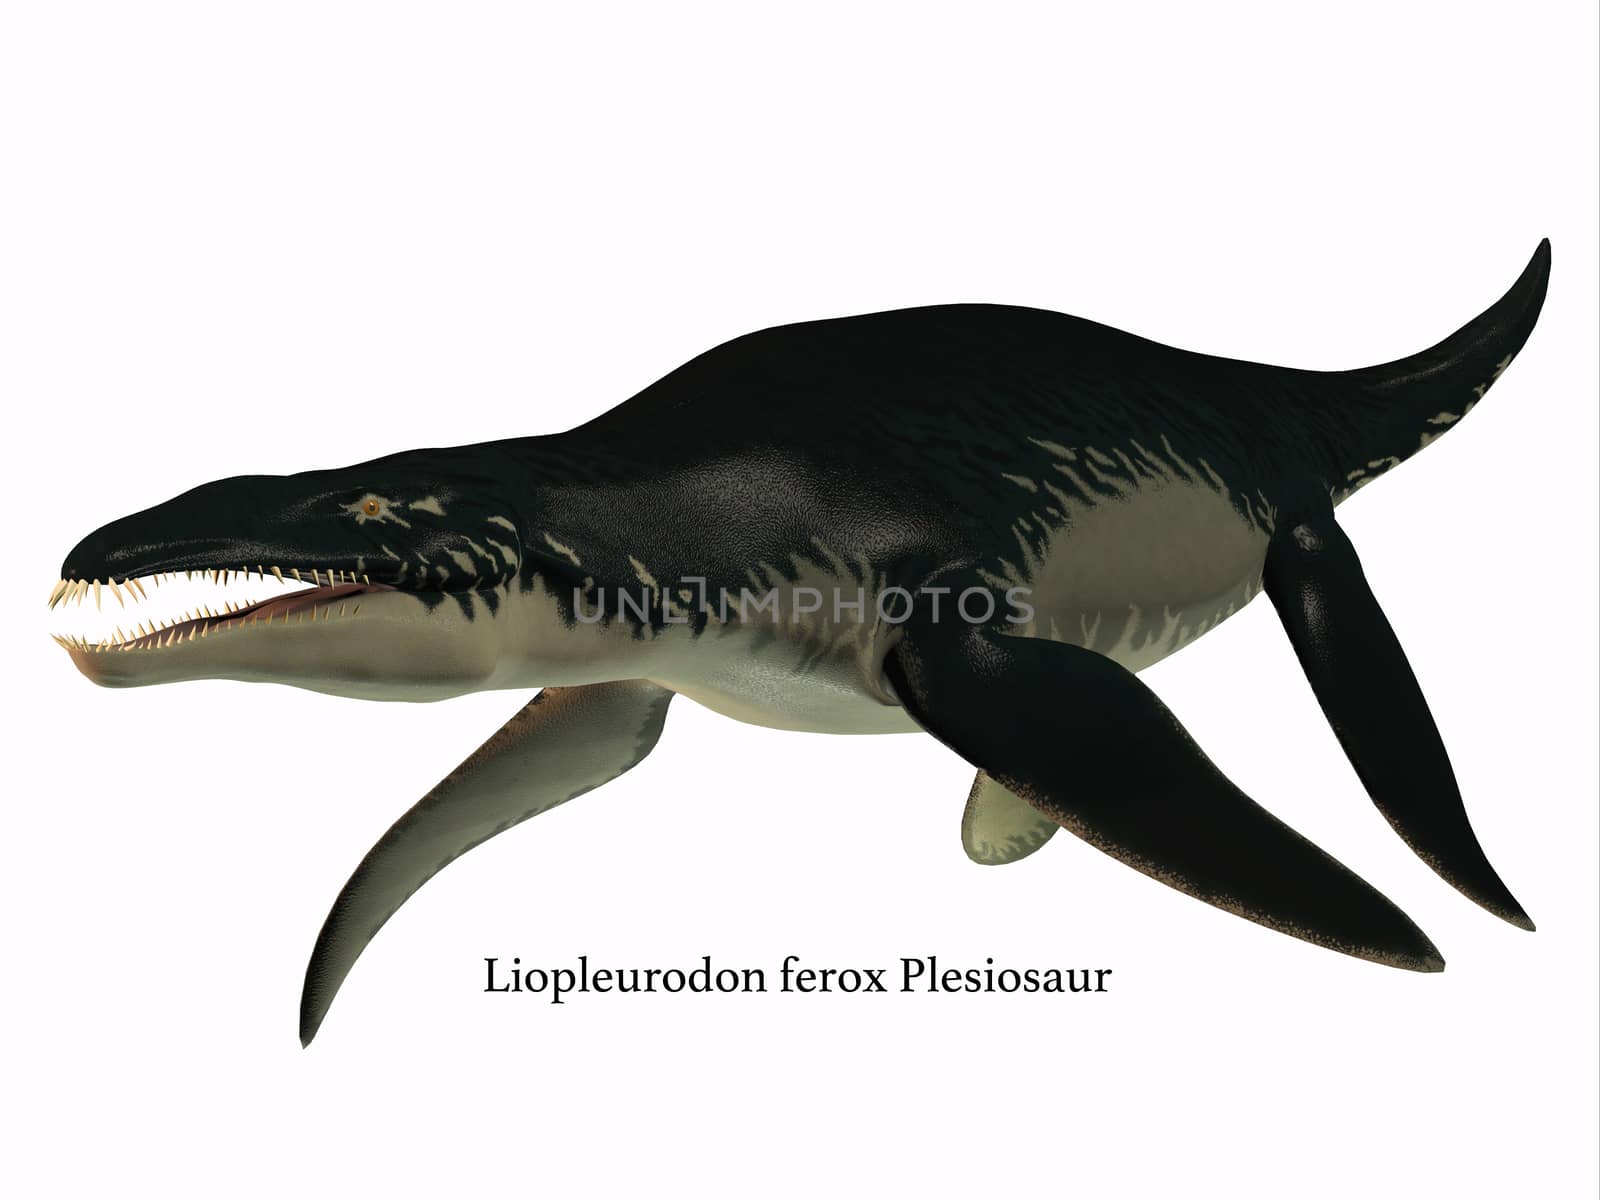 Liopleurodon was a carnivorous marine reptile that lived in Jurassic seas of France and England.